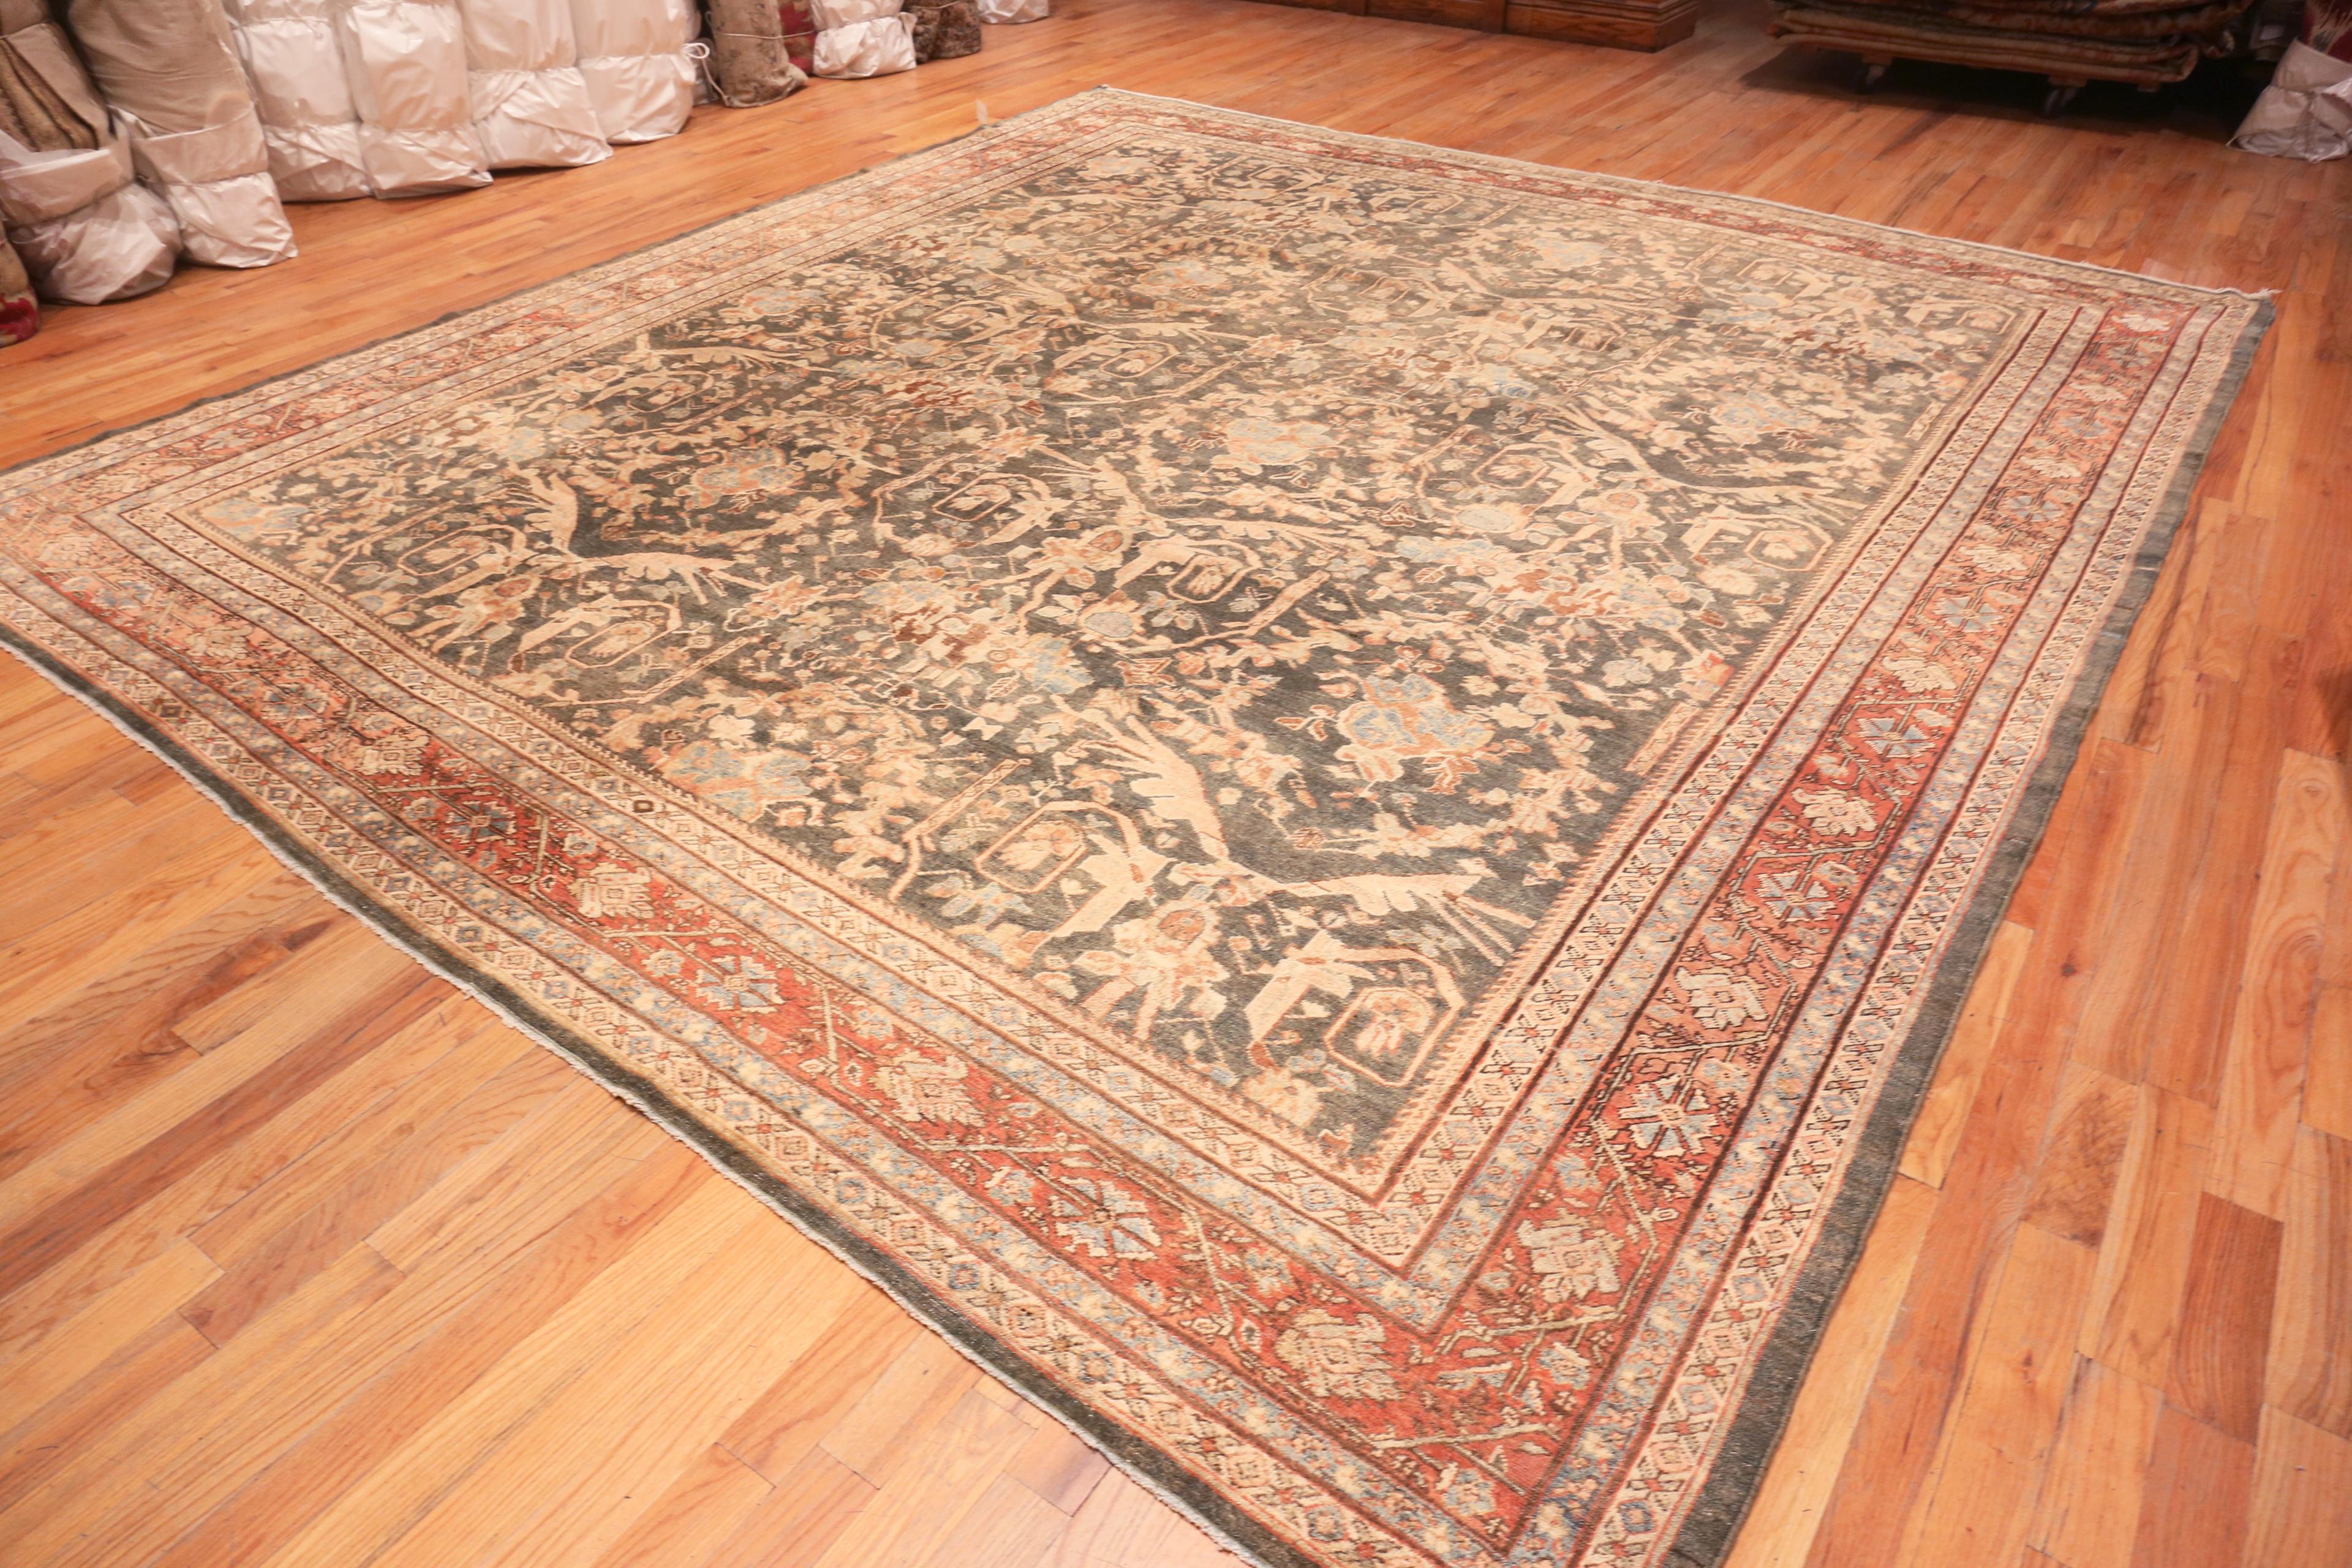 Breathtaking Mostofi Design Antique Persian Sultanabad Rug, country of Origin/Rug type: Persian rug, Circa date: 1900. Size: 12 ft 5 in x 14 ft (3.78 m x 4.27 m)
 